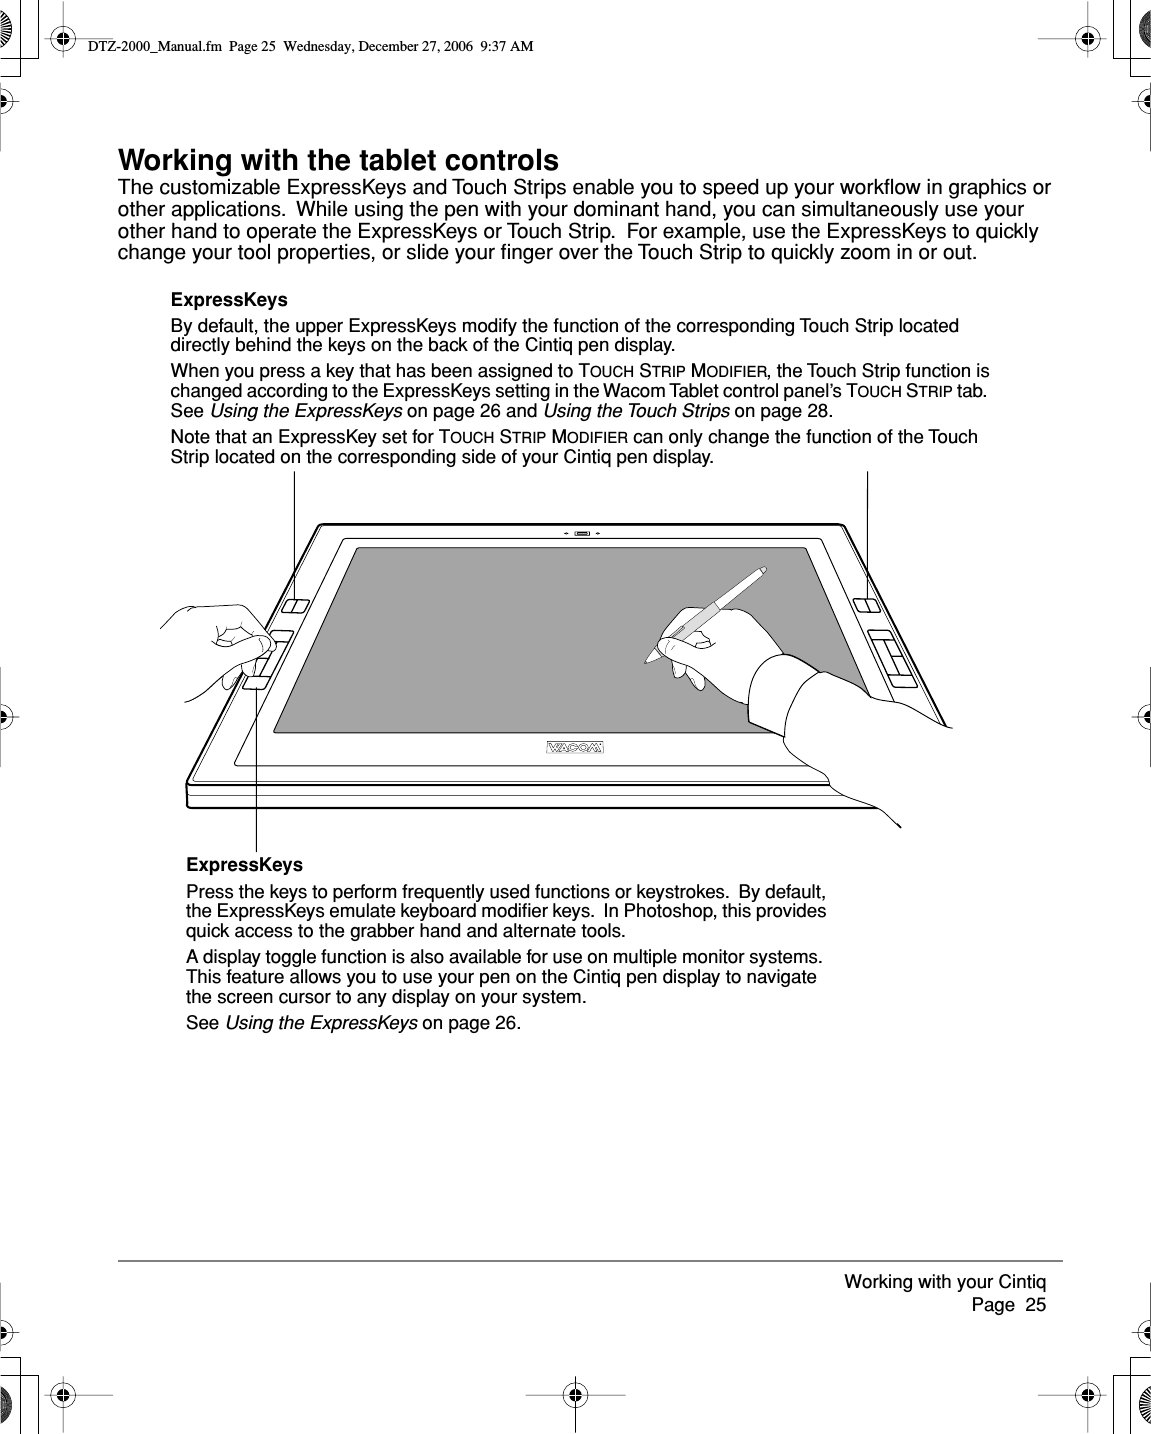 Working with your Cintiq     Page  25Working with the tablet controlsThe customizable ExpressKeys and Touch Strips enable you to speed up your workﬂow in graphics or other applications.  While using the pen with your dominant hand, you can simultaneously use your other hand to operate the ExpressKeys or Touch Strip.  For example, use the ExpressKeys to quickly change your tool properties, or slide your ﬁnger over the Touch Strip to quickly zoom in or out.ExpressKeysPress the keys to perform frequently used functions or keystrokes.  By default, the ExpressKeys emulate keyboard modiﬁer keys.  In Photoshop, this provides quick access to the grabber hand and alternate tools.  A display toggle function is also available for use on multiple monitor systems.  This feature allows you to use your pen on the Cintiq pen display to navigate the screen cursor to any display on your system.See Using the ExpressKeys on page 26.ExpressKeysBy default, the upper ExpressKeys modify the function of the corresponding Touch Strip located directly behind the keys on the back of the Cintiq pen display.When you press a key that has been assigned to TOUCH STRIP MODIFIER, the Touch Strip function is changed according to the ExpressKeys setting in the Wacom Tablet control panel’s TOUCH STRIP tab.  See Using the ExpressKeys on page 26 and Using the Touch Strips on page 28.Note that an ExpressKey set for TOUCH STRIP MODIFIER can only change the function of the Touch Strip located on the corresponding side of your Cintiq pen display.DTZ-2000_Manual.fm  Page 25  Wednesday, December 27, 2006  9:37 AM